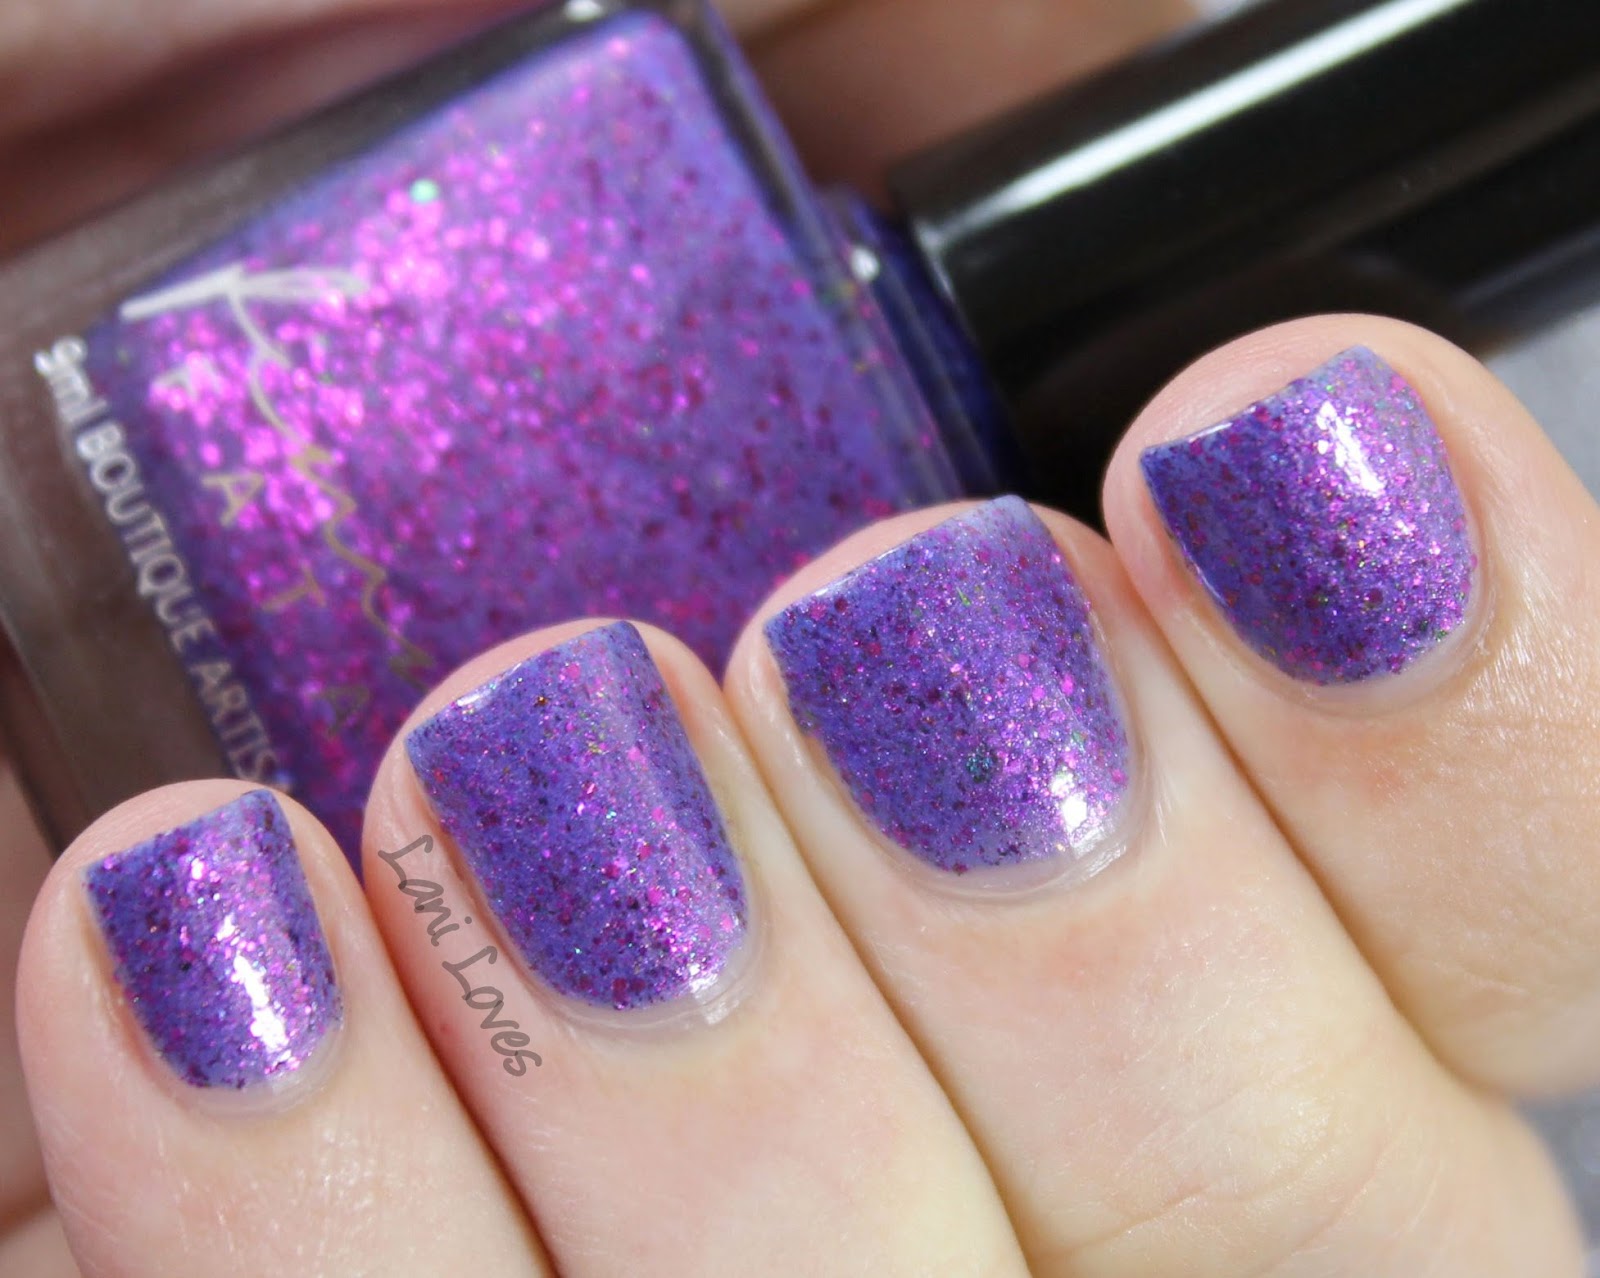 Femme Fatale Cosmetics - Bodice Lace nail polish swatches & review